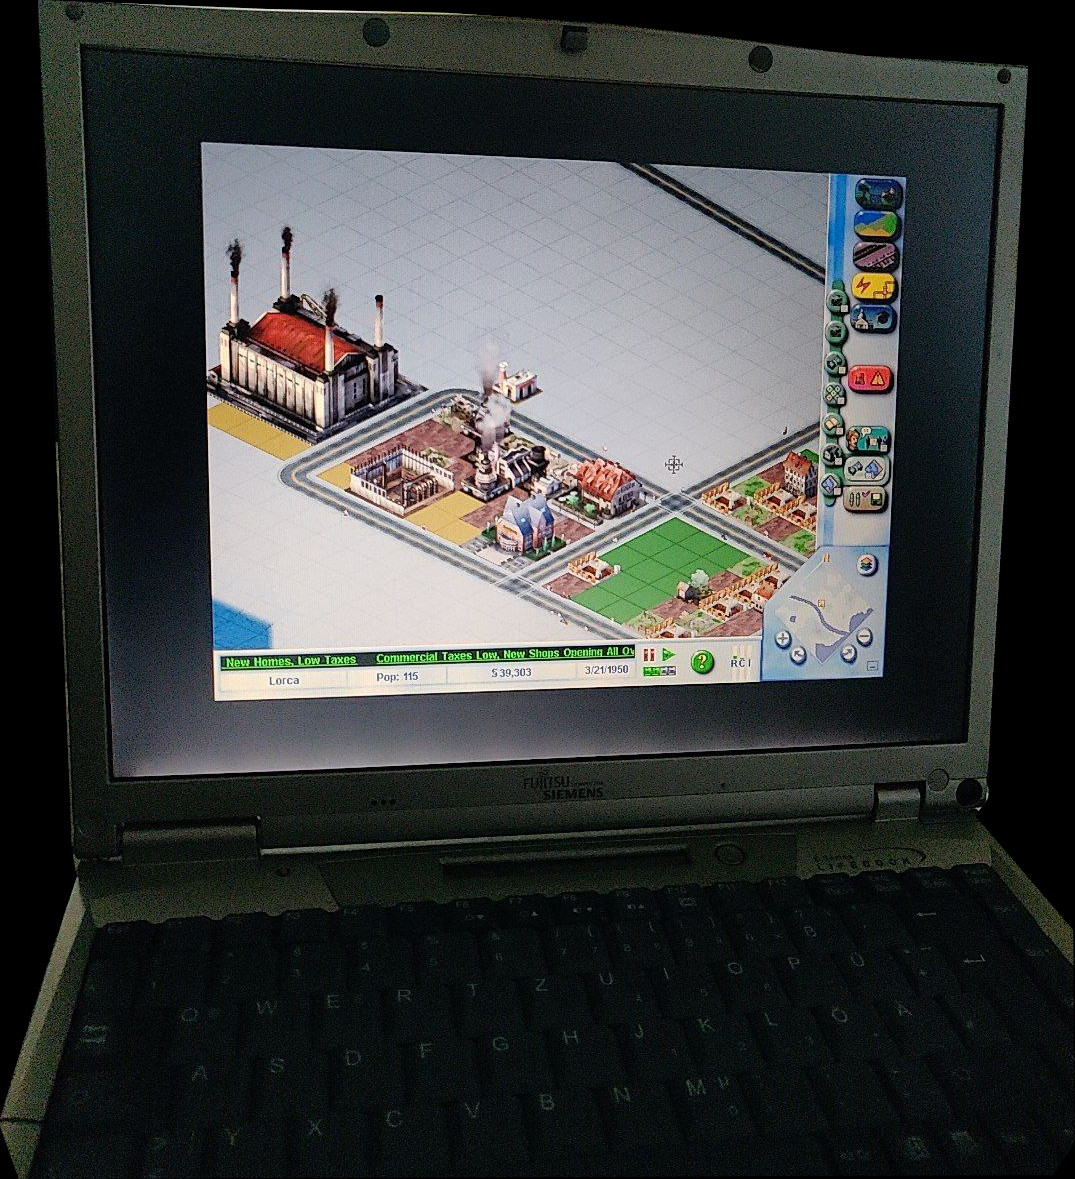 SimCity on the laptop.